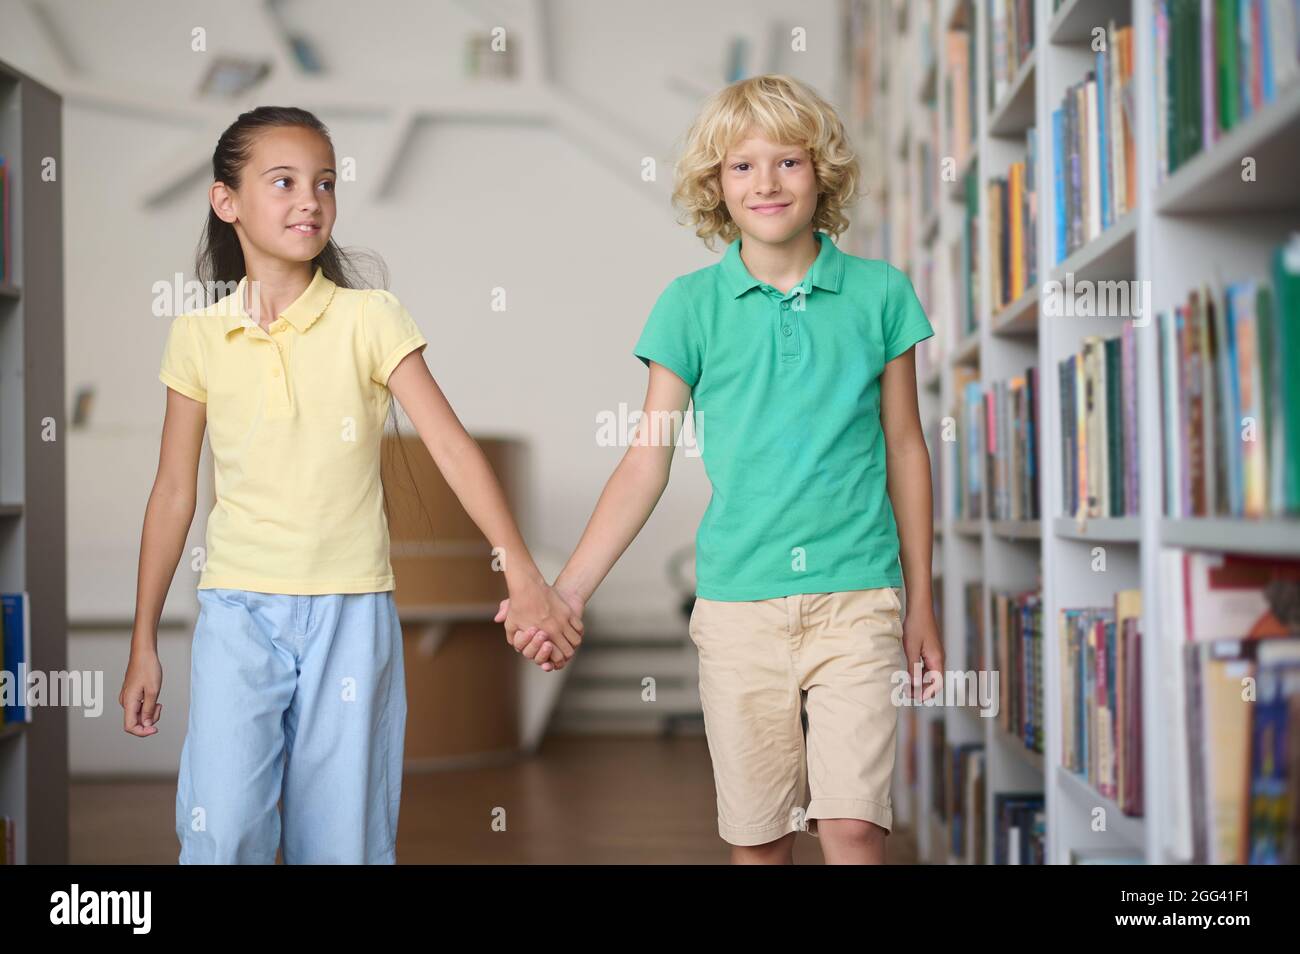 Two friends passing by bookshelves at a public library Stock Photo